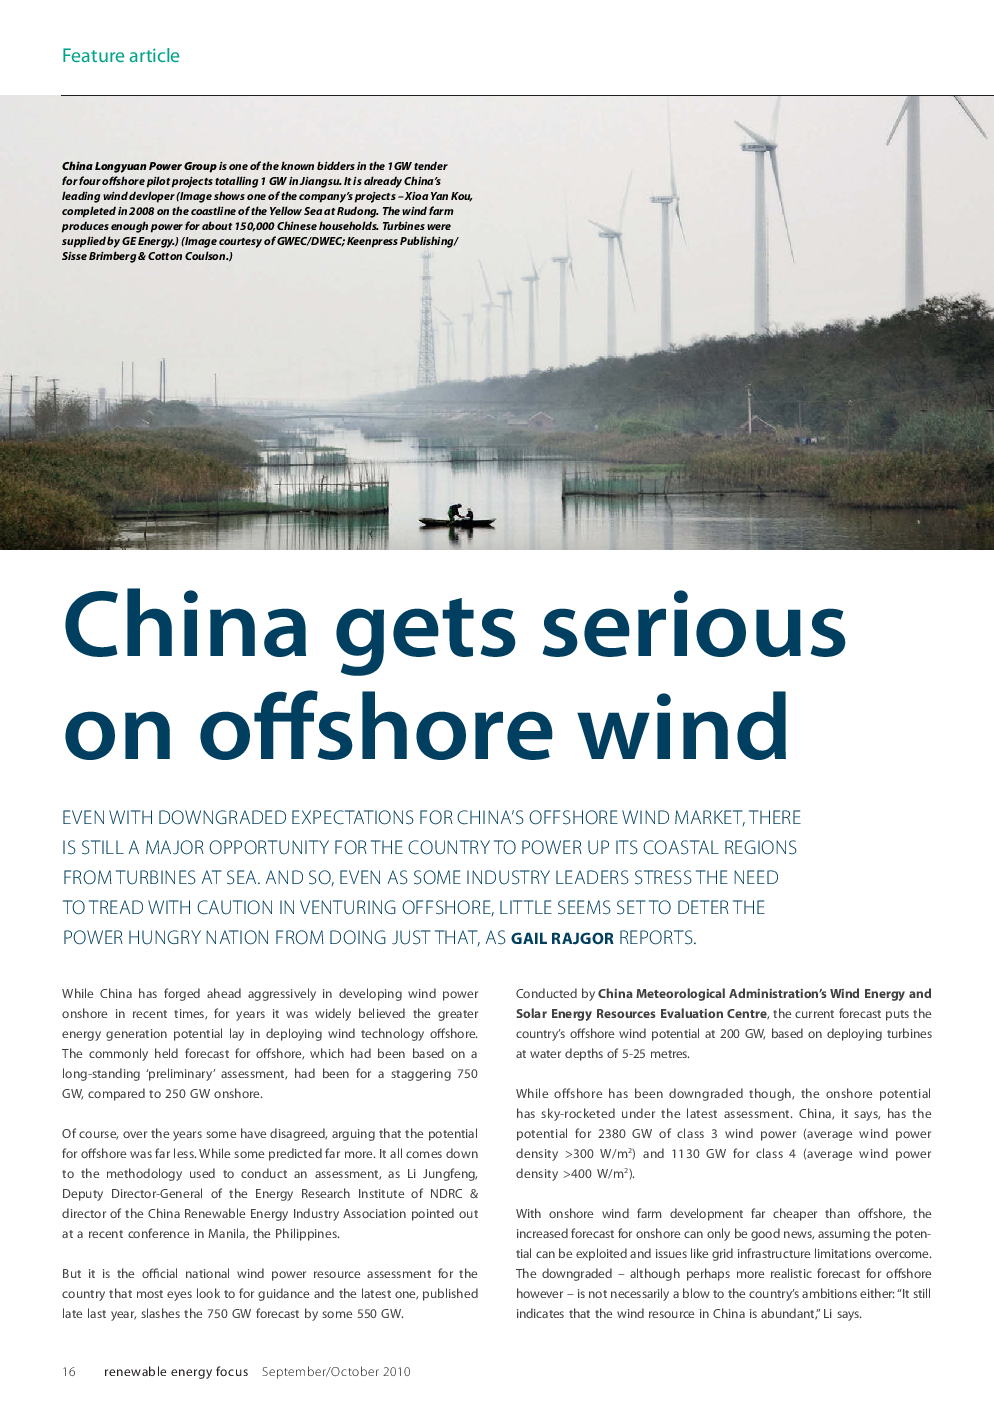 China gets serious on offshore wind